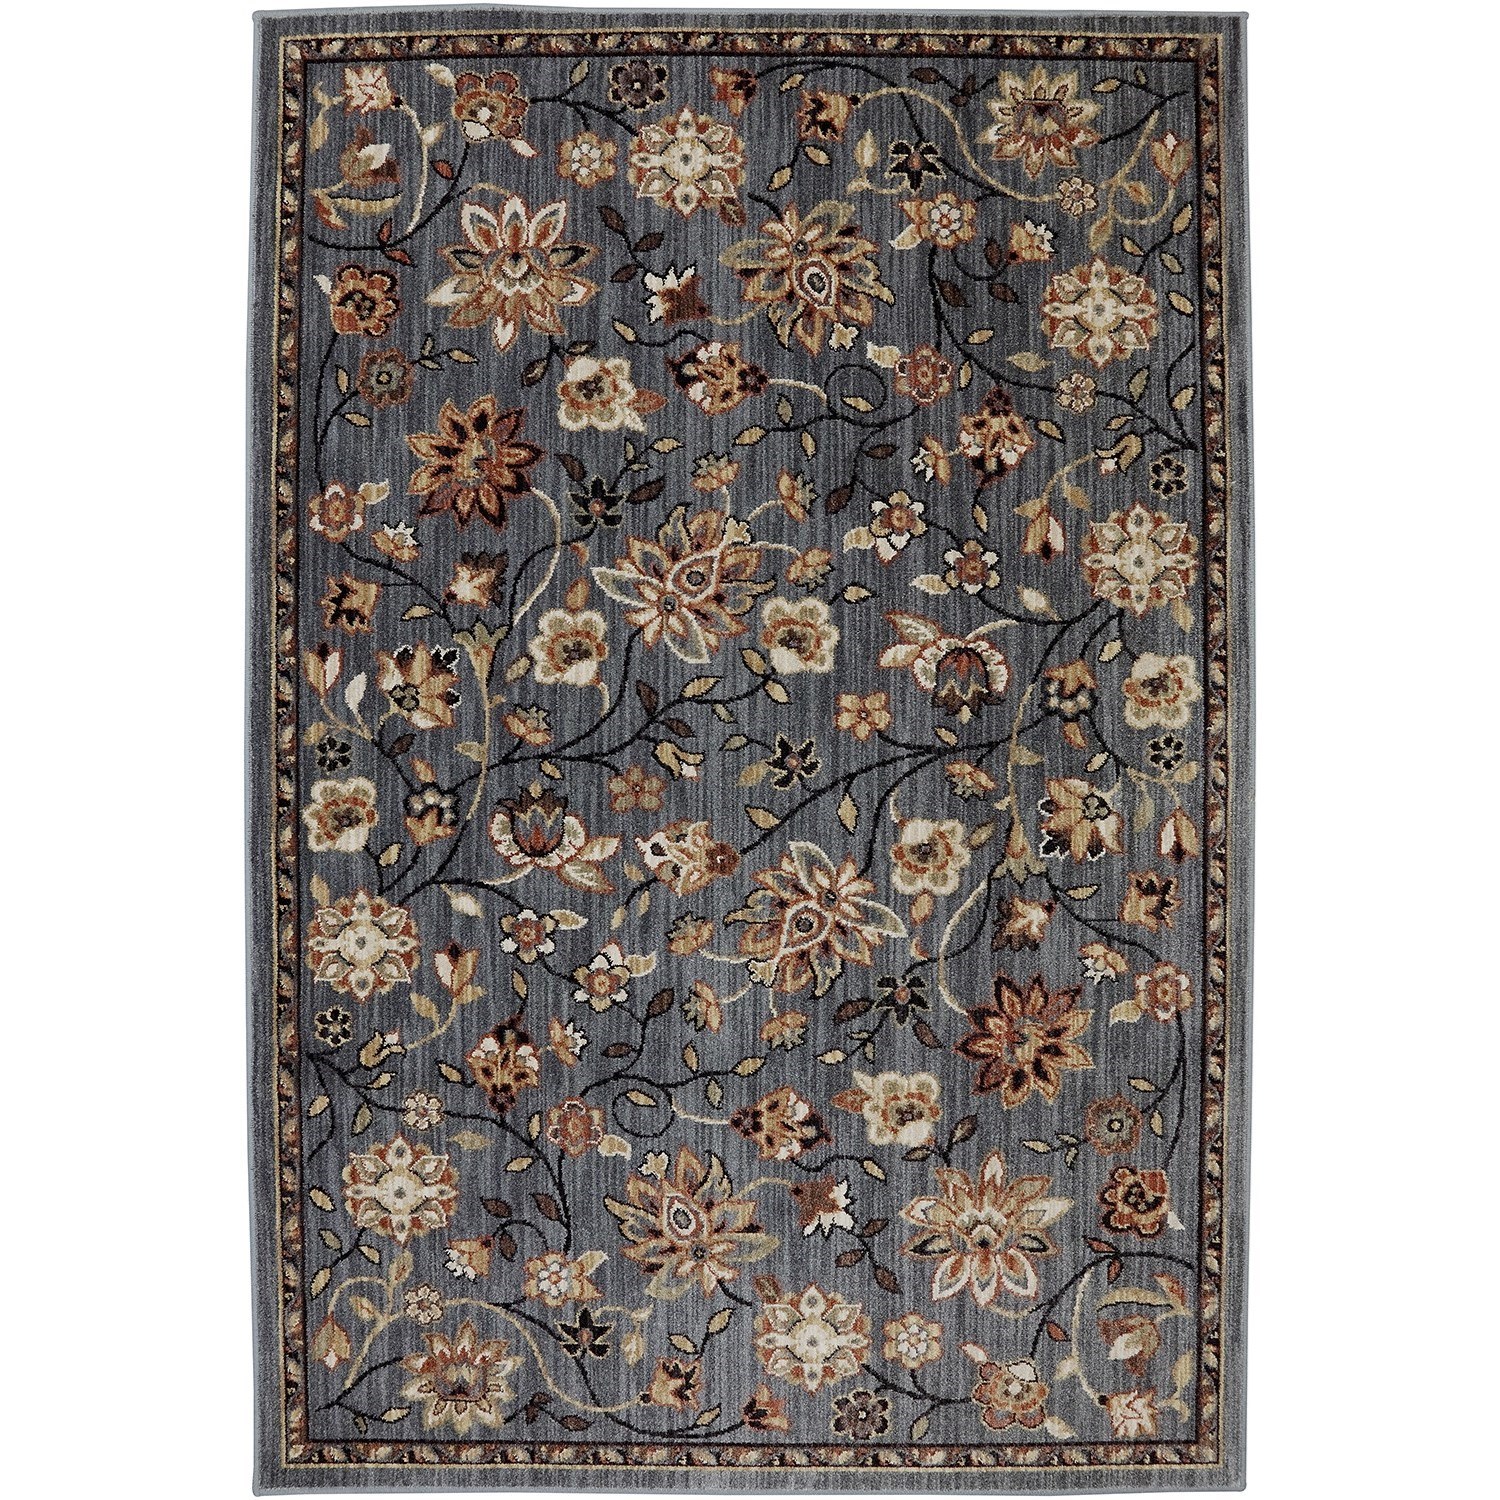 9' 6"x12' 11" Emerson Abyss Blue Area Rug